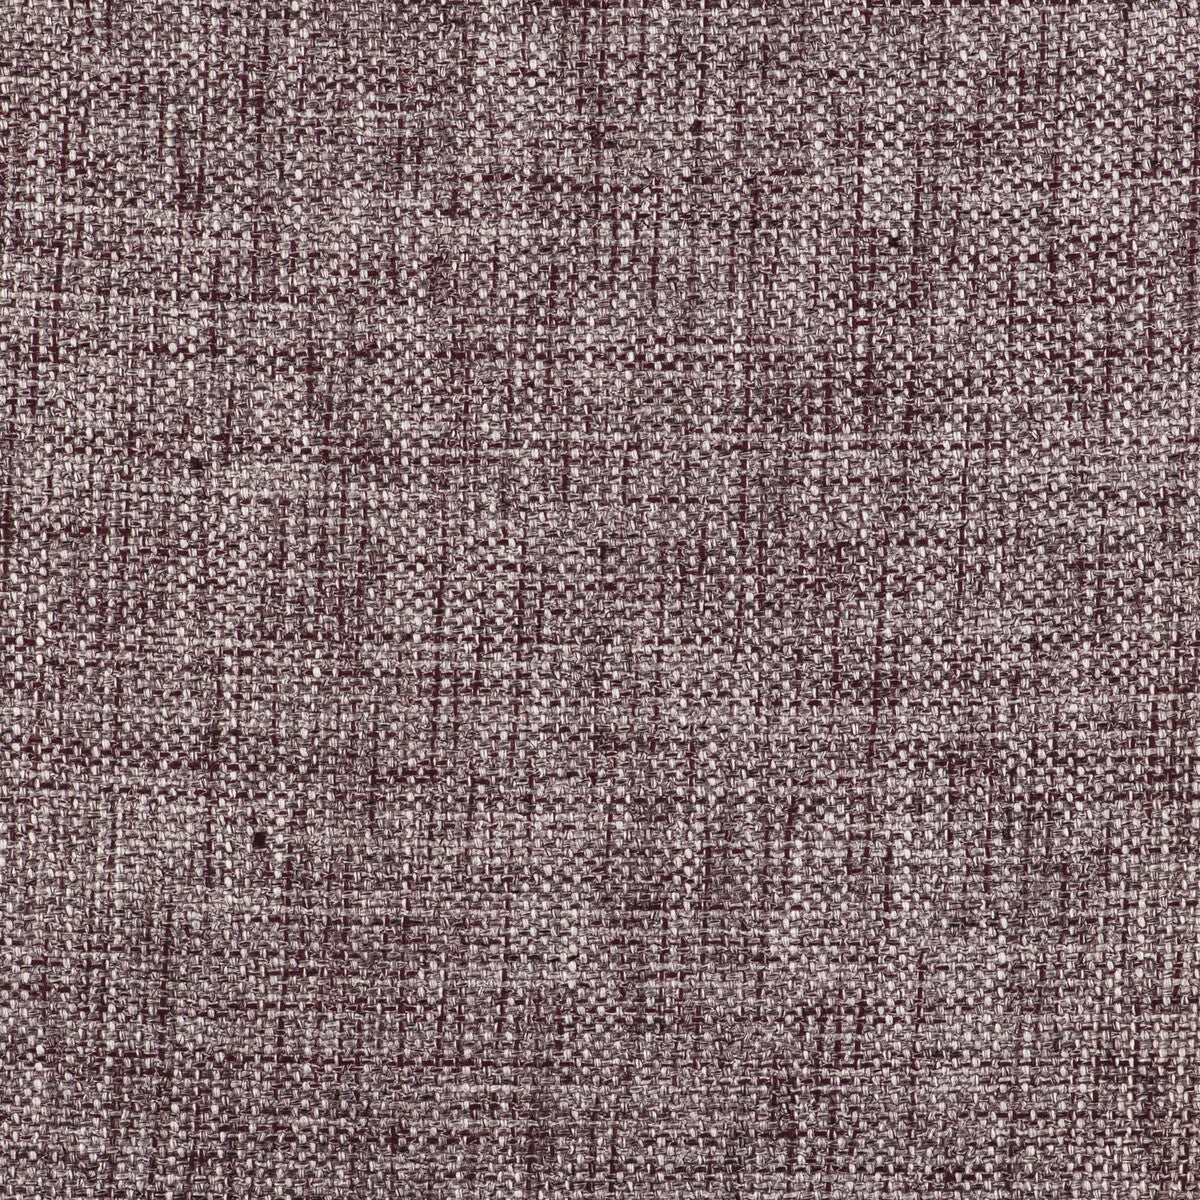 Red fabric in vino color - pattern GDT5535.014.0 - by Gaston y Daniela in the Gaston Libreria collection